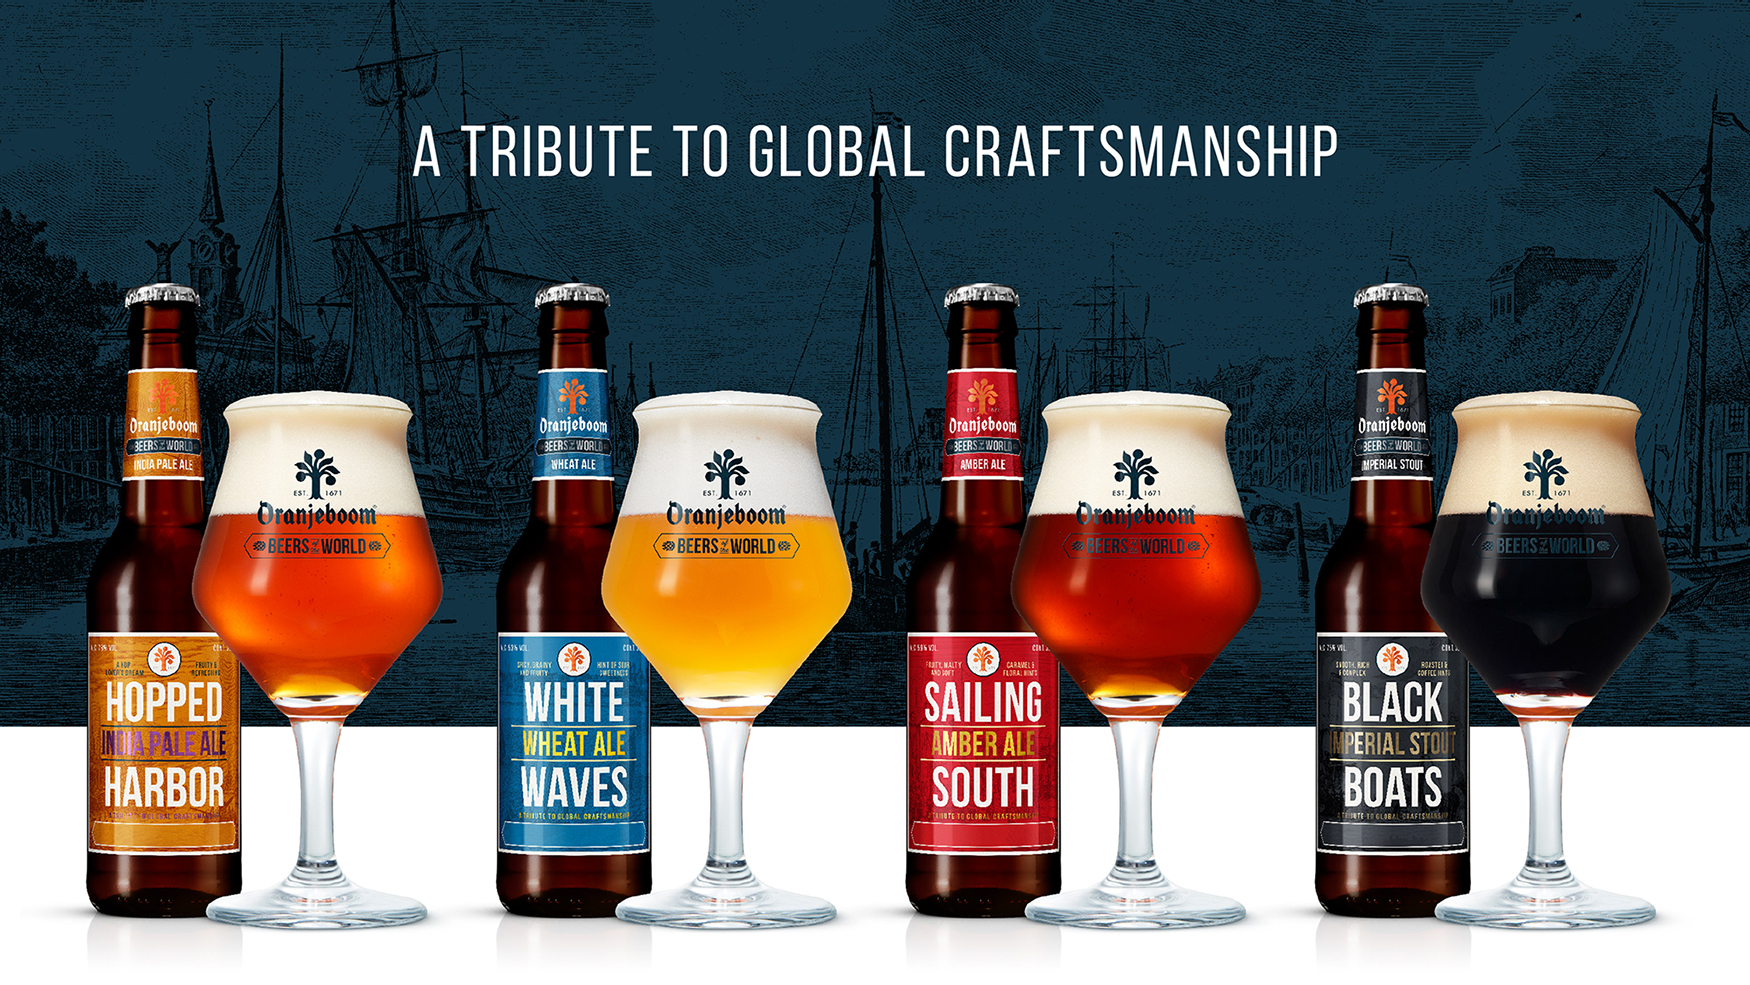 Oranjeboom Beers of the World. A tribute to Global Craftsmanship